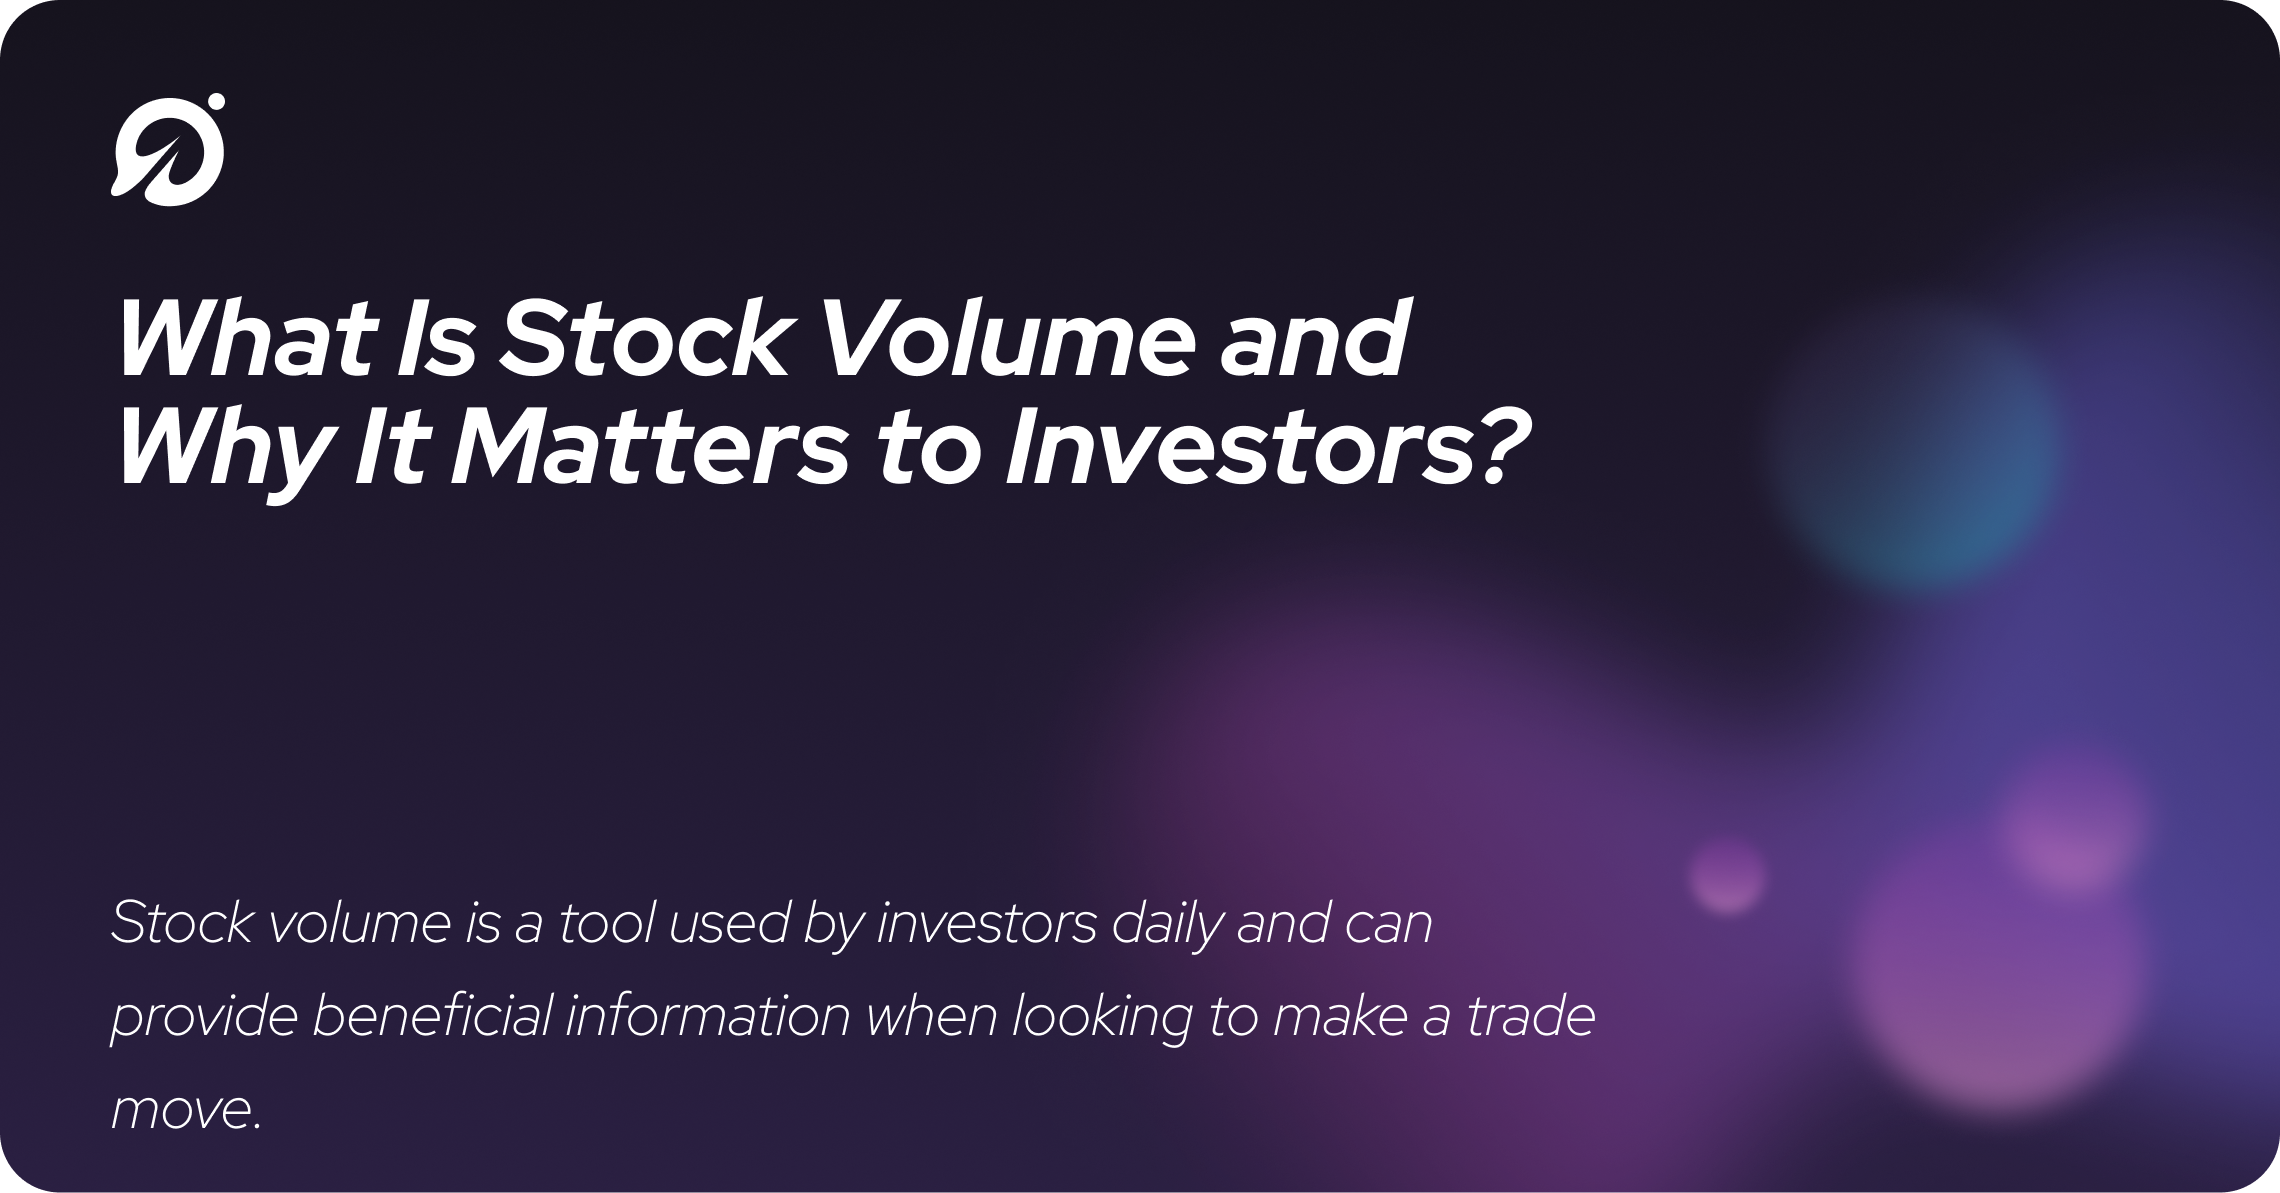 What Is Stock Volume and Why It Matters to Investors?